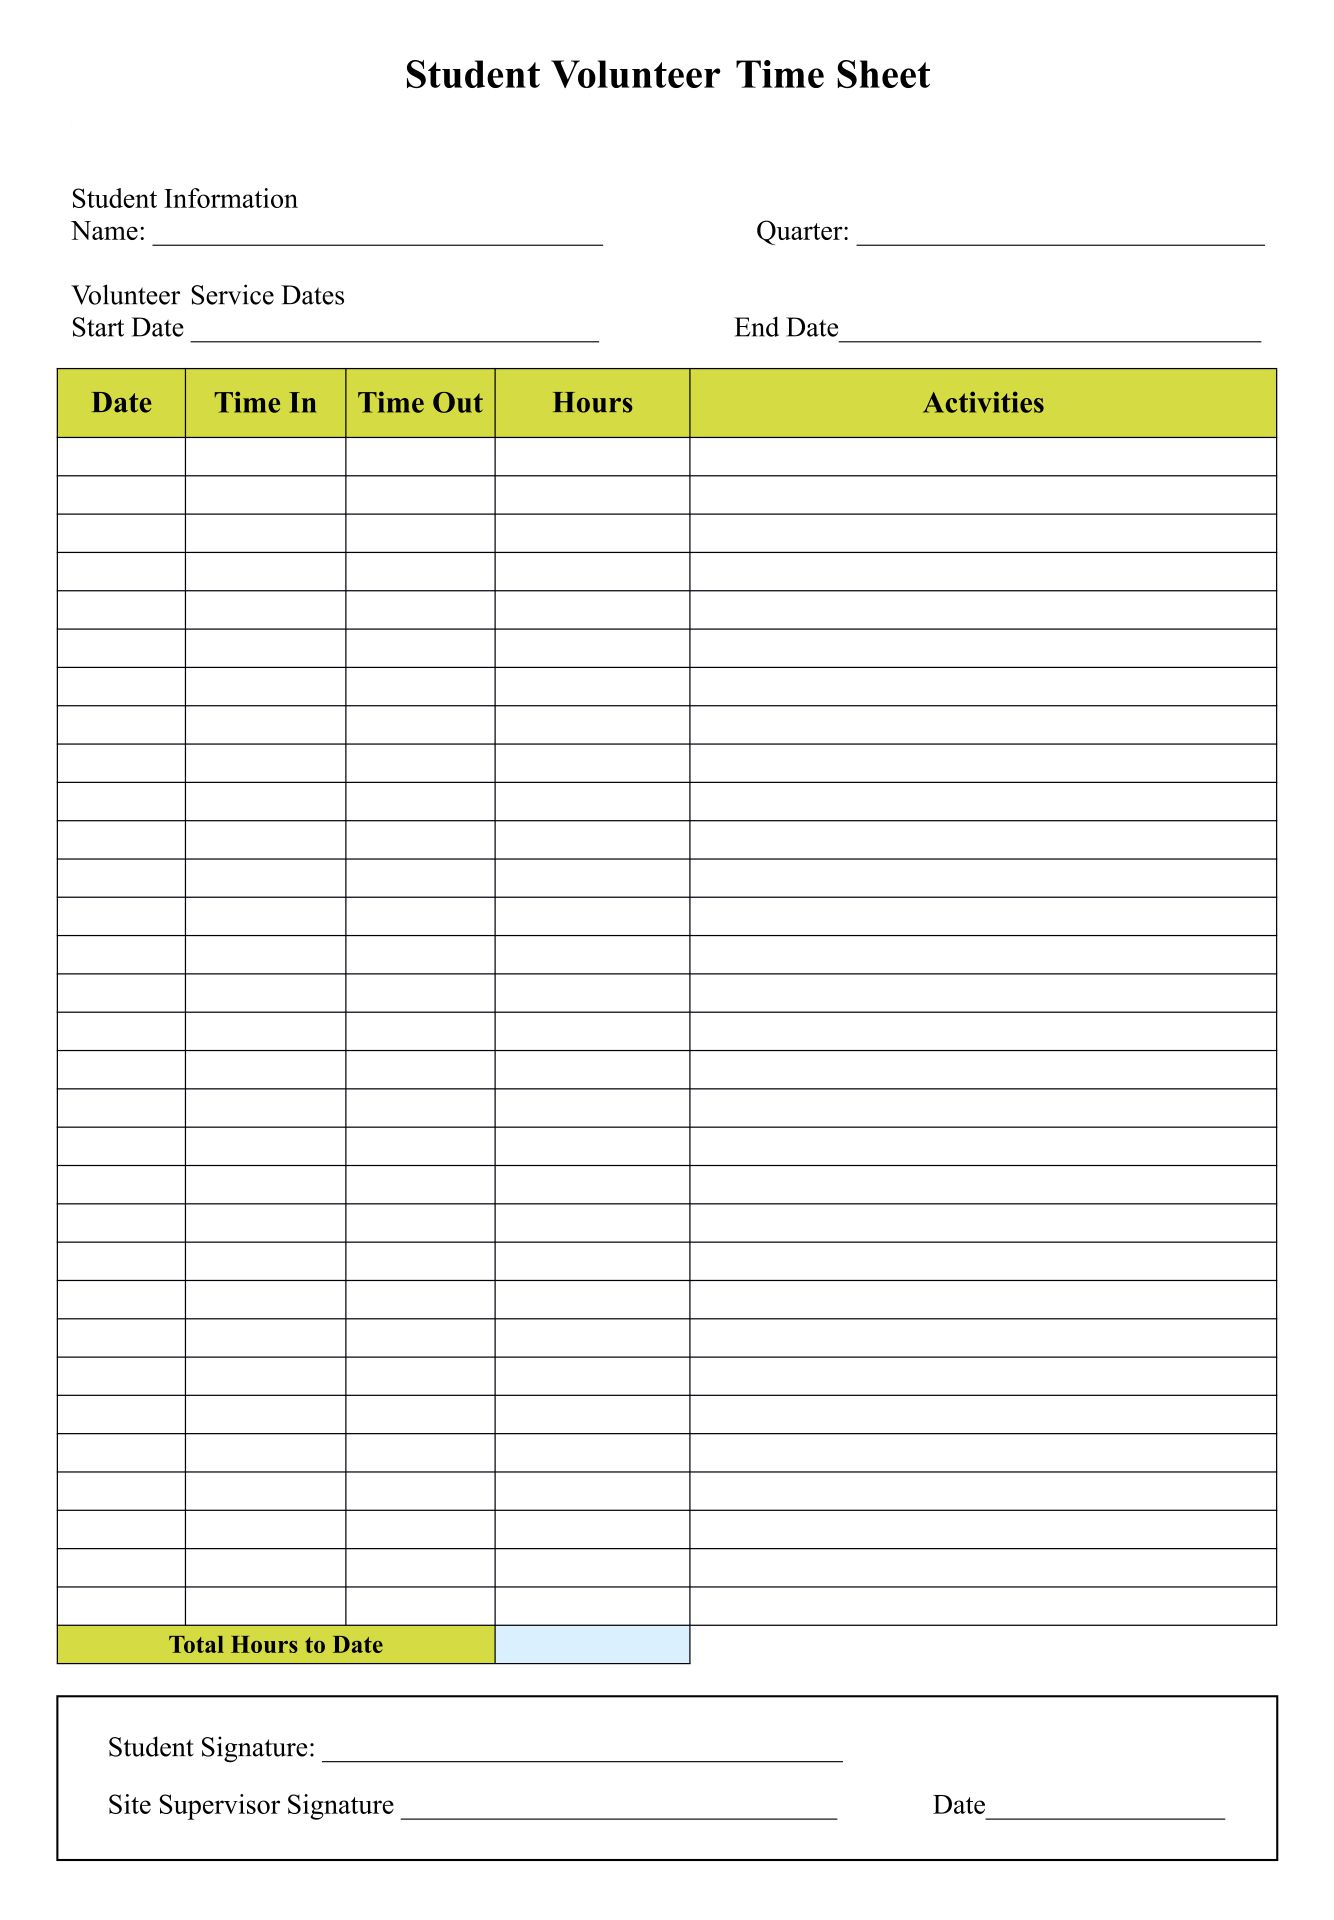 monthly-timesheet-template-printable-timesheet-template-template-vrogue